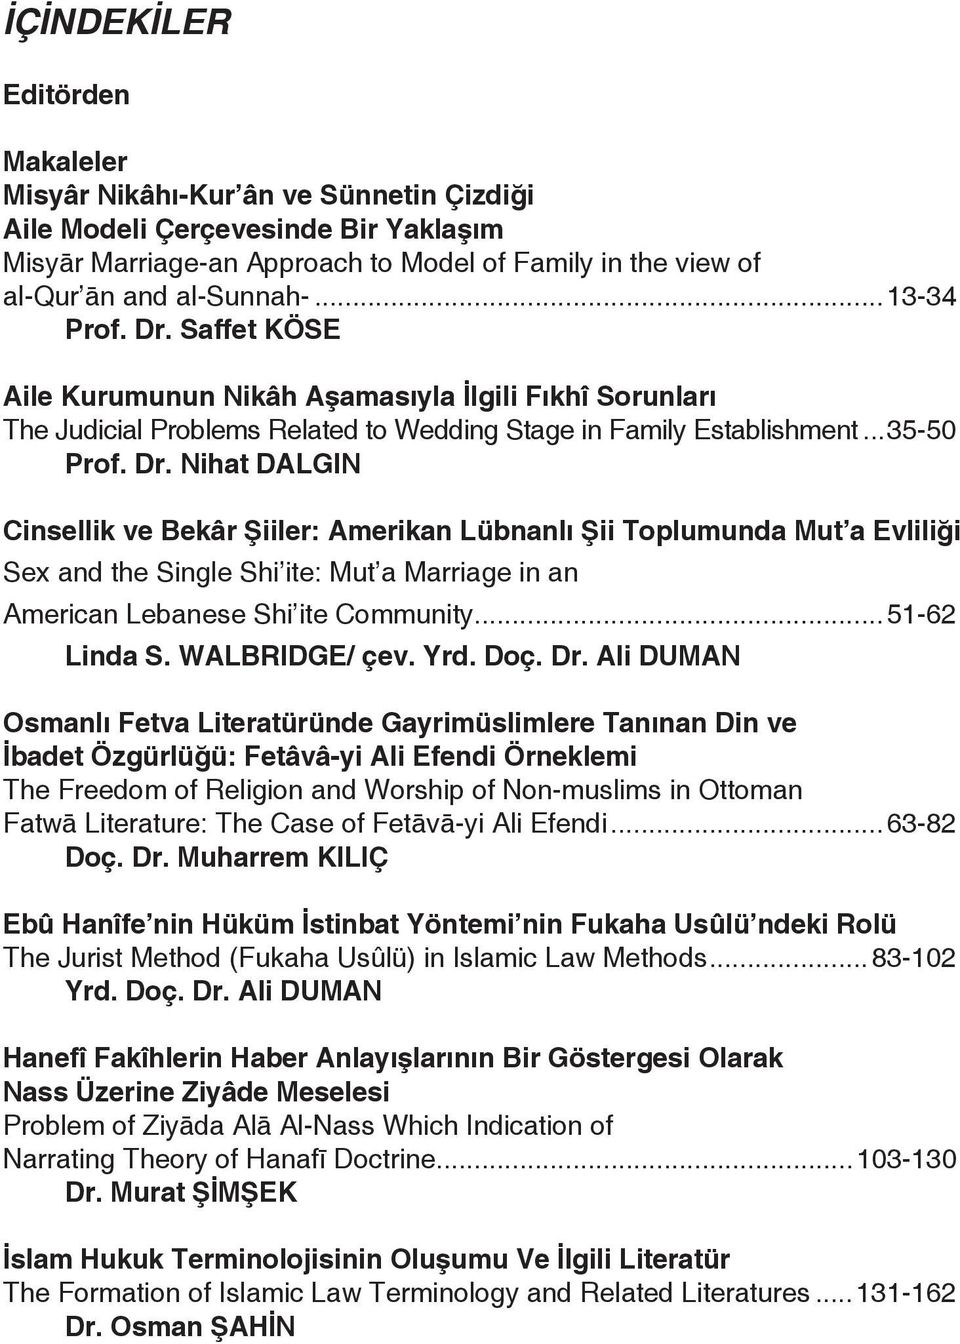 i Sex and the Single Shi ite: Mut a Marriage in an American Lebanese Shi ite Community...51-62 Linda S. WALBRIDGE/ çev. Yrd. Doç. Dr.